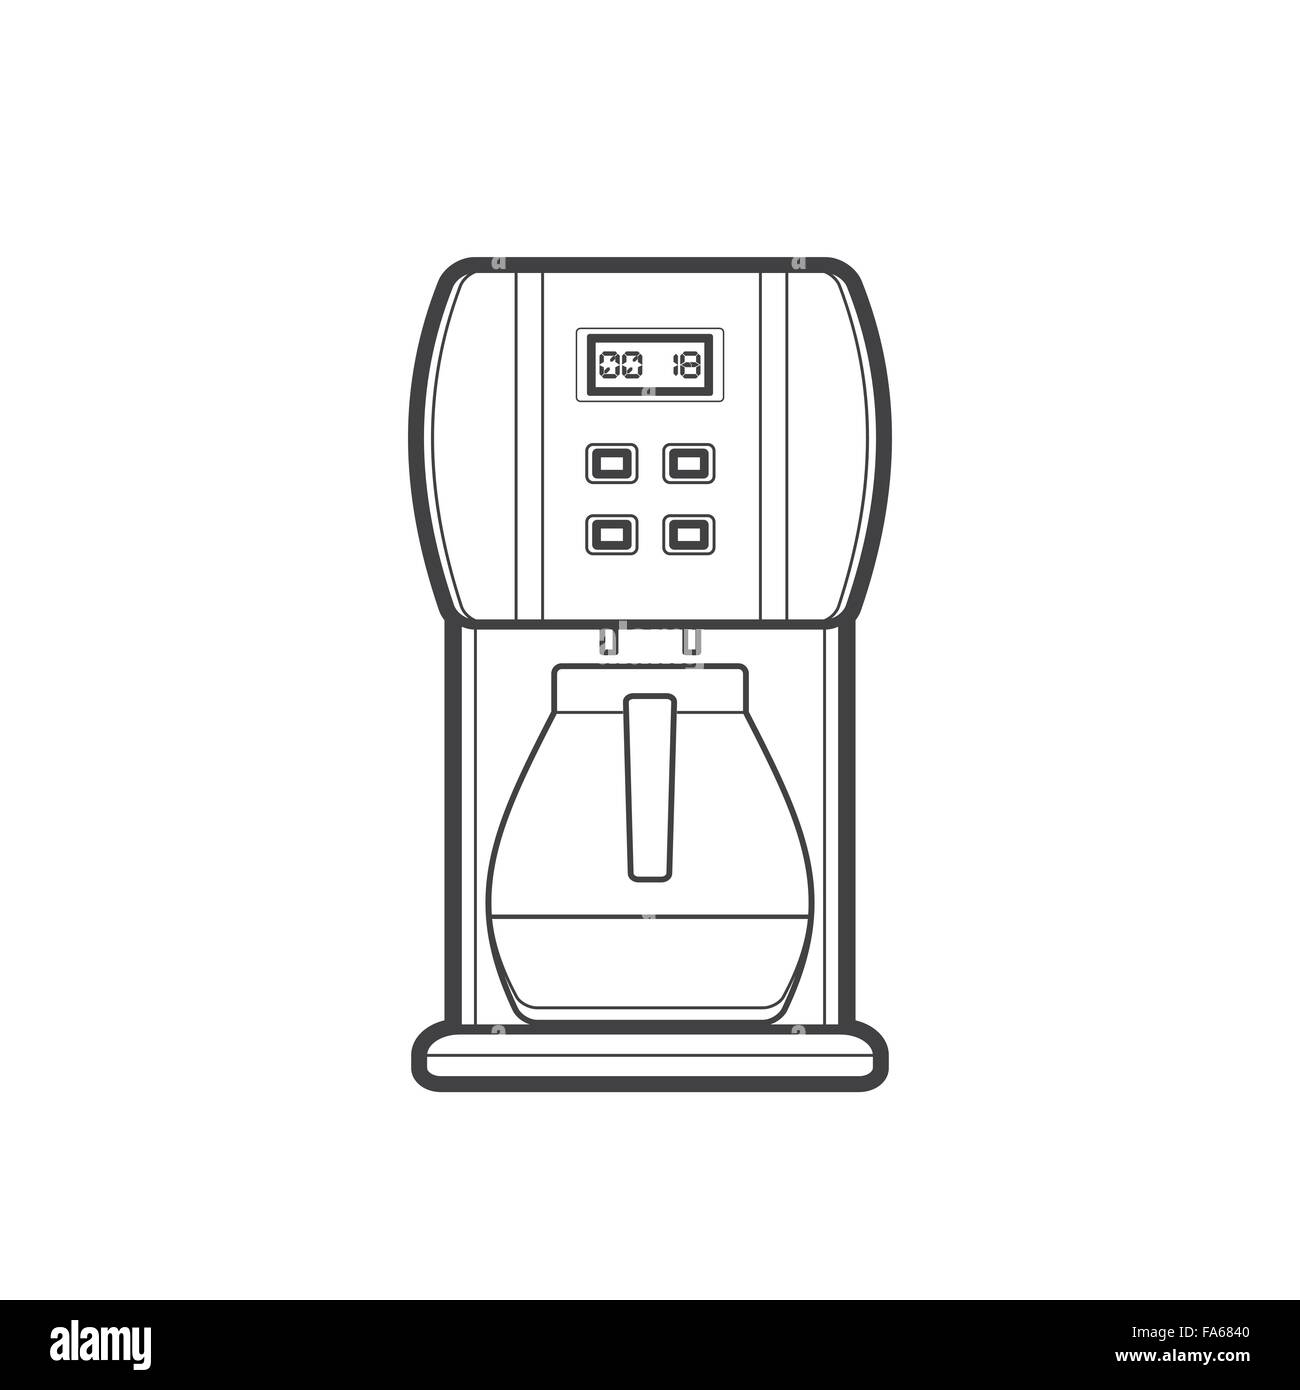 vector monochrome contour kitchen electric coffee machine isolated black outline illustration on white background Stock Vector